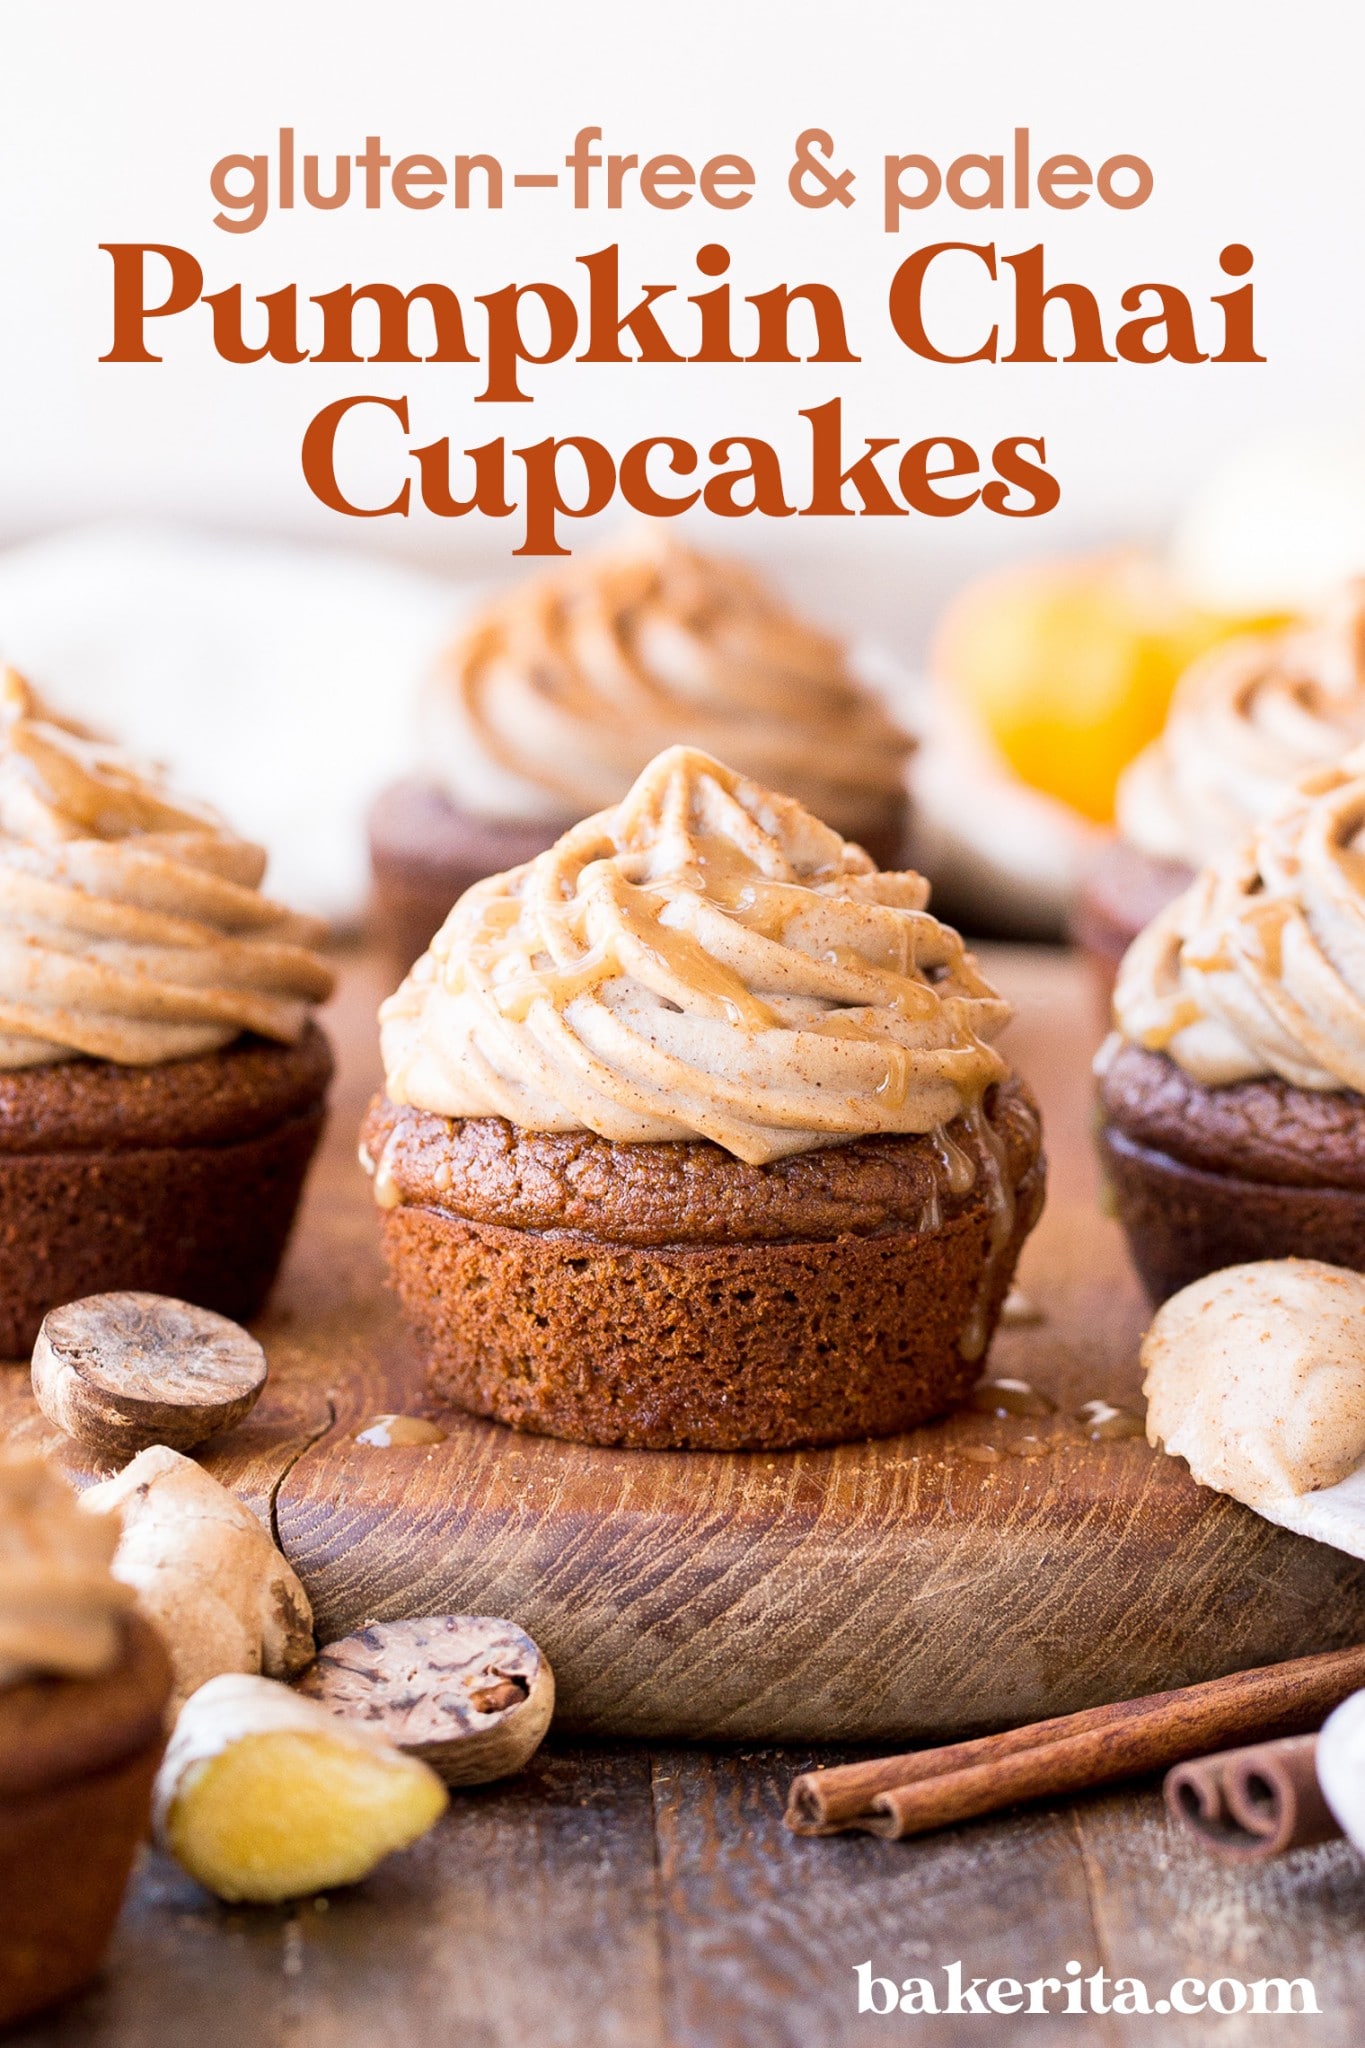 These Gluten-Free & Paleo Pumpkin Chai Cupcakes are soft, moist and bursting with warm chai spices and pumpkin flavor. They're topped with an irresistible cashew-based chai frosting that you'd never guess is paleo + vegan.